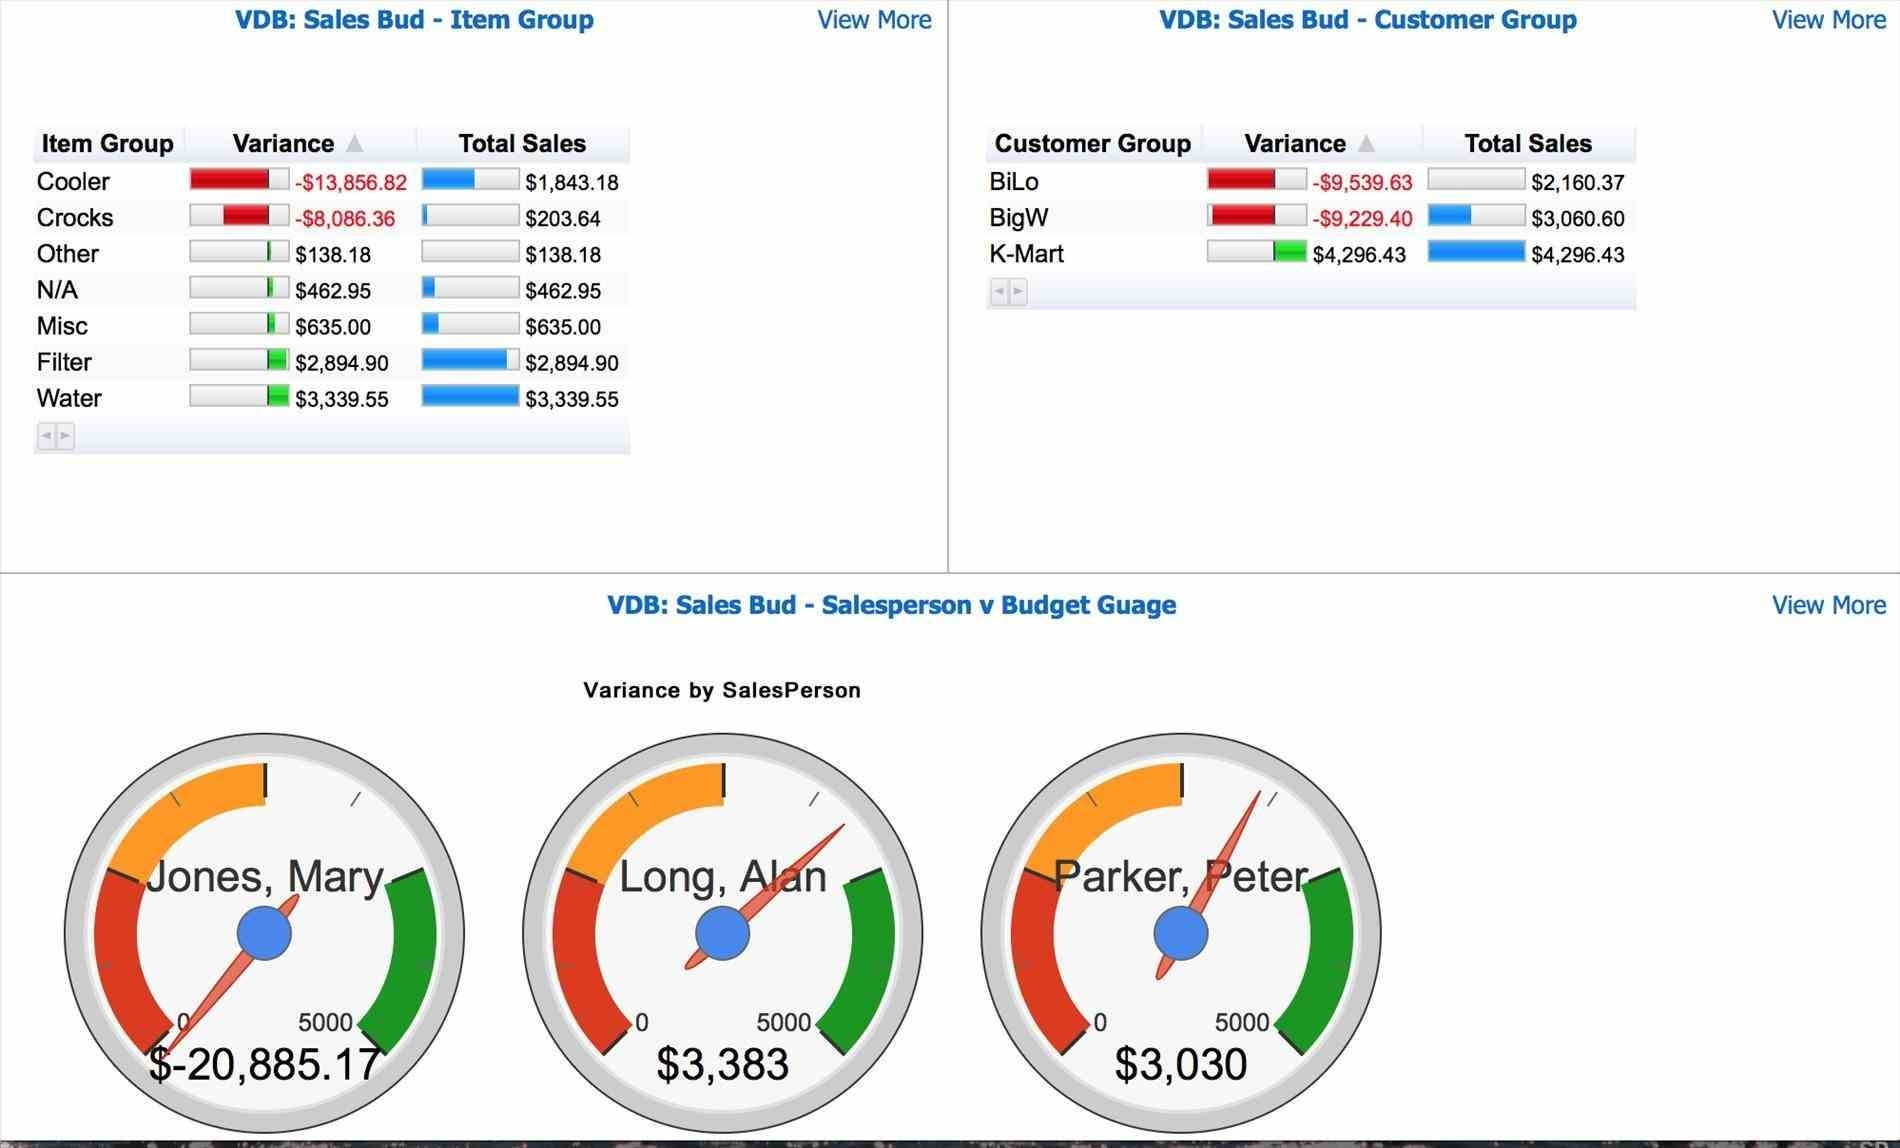 Dashboard Templates Plan Template Single Powerpivot And Ssas Data With Excel Kpi Gauge Template